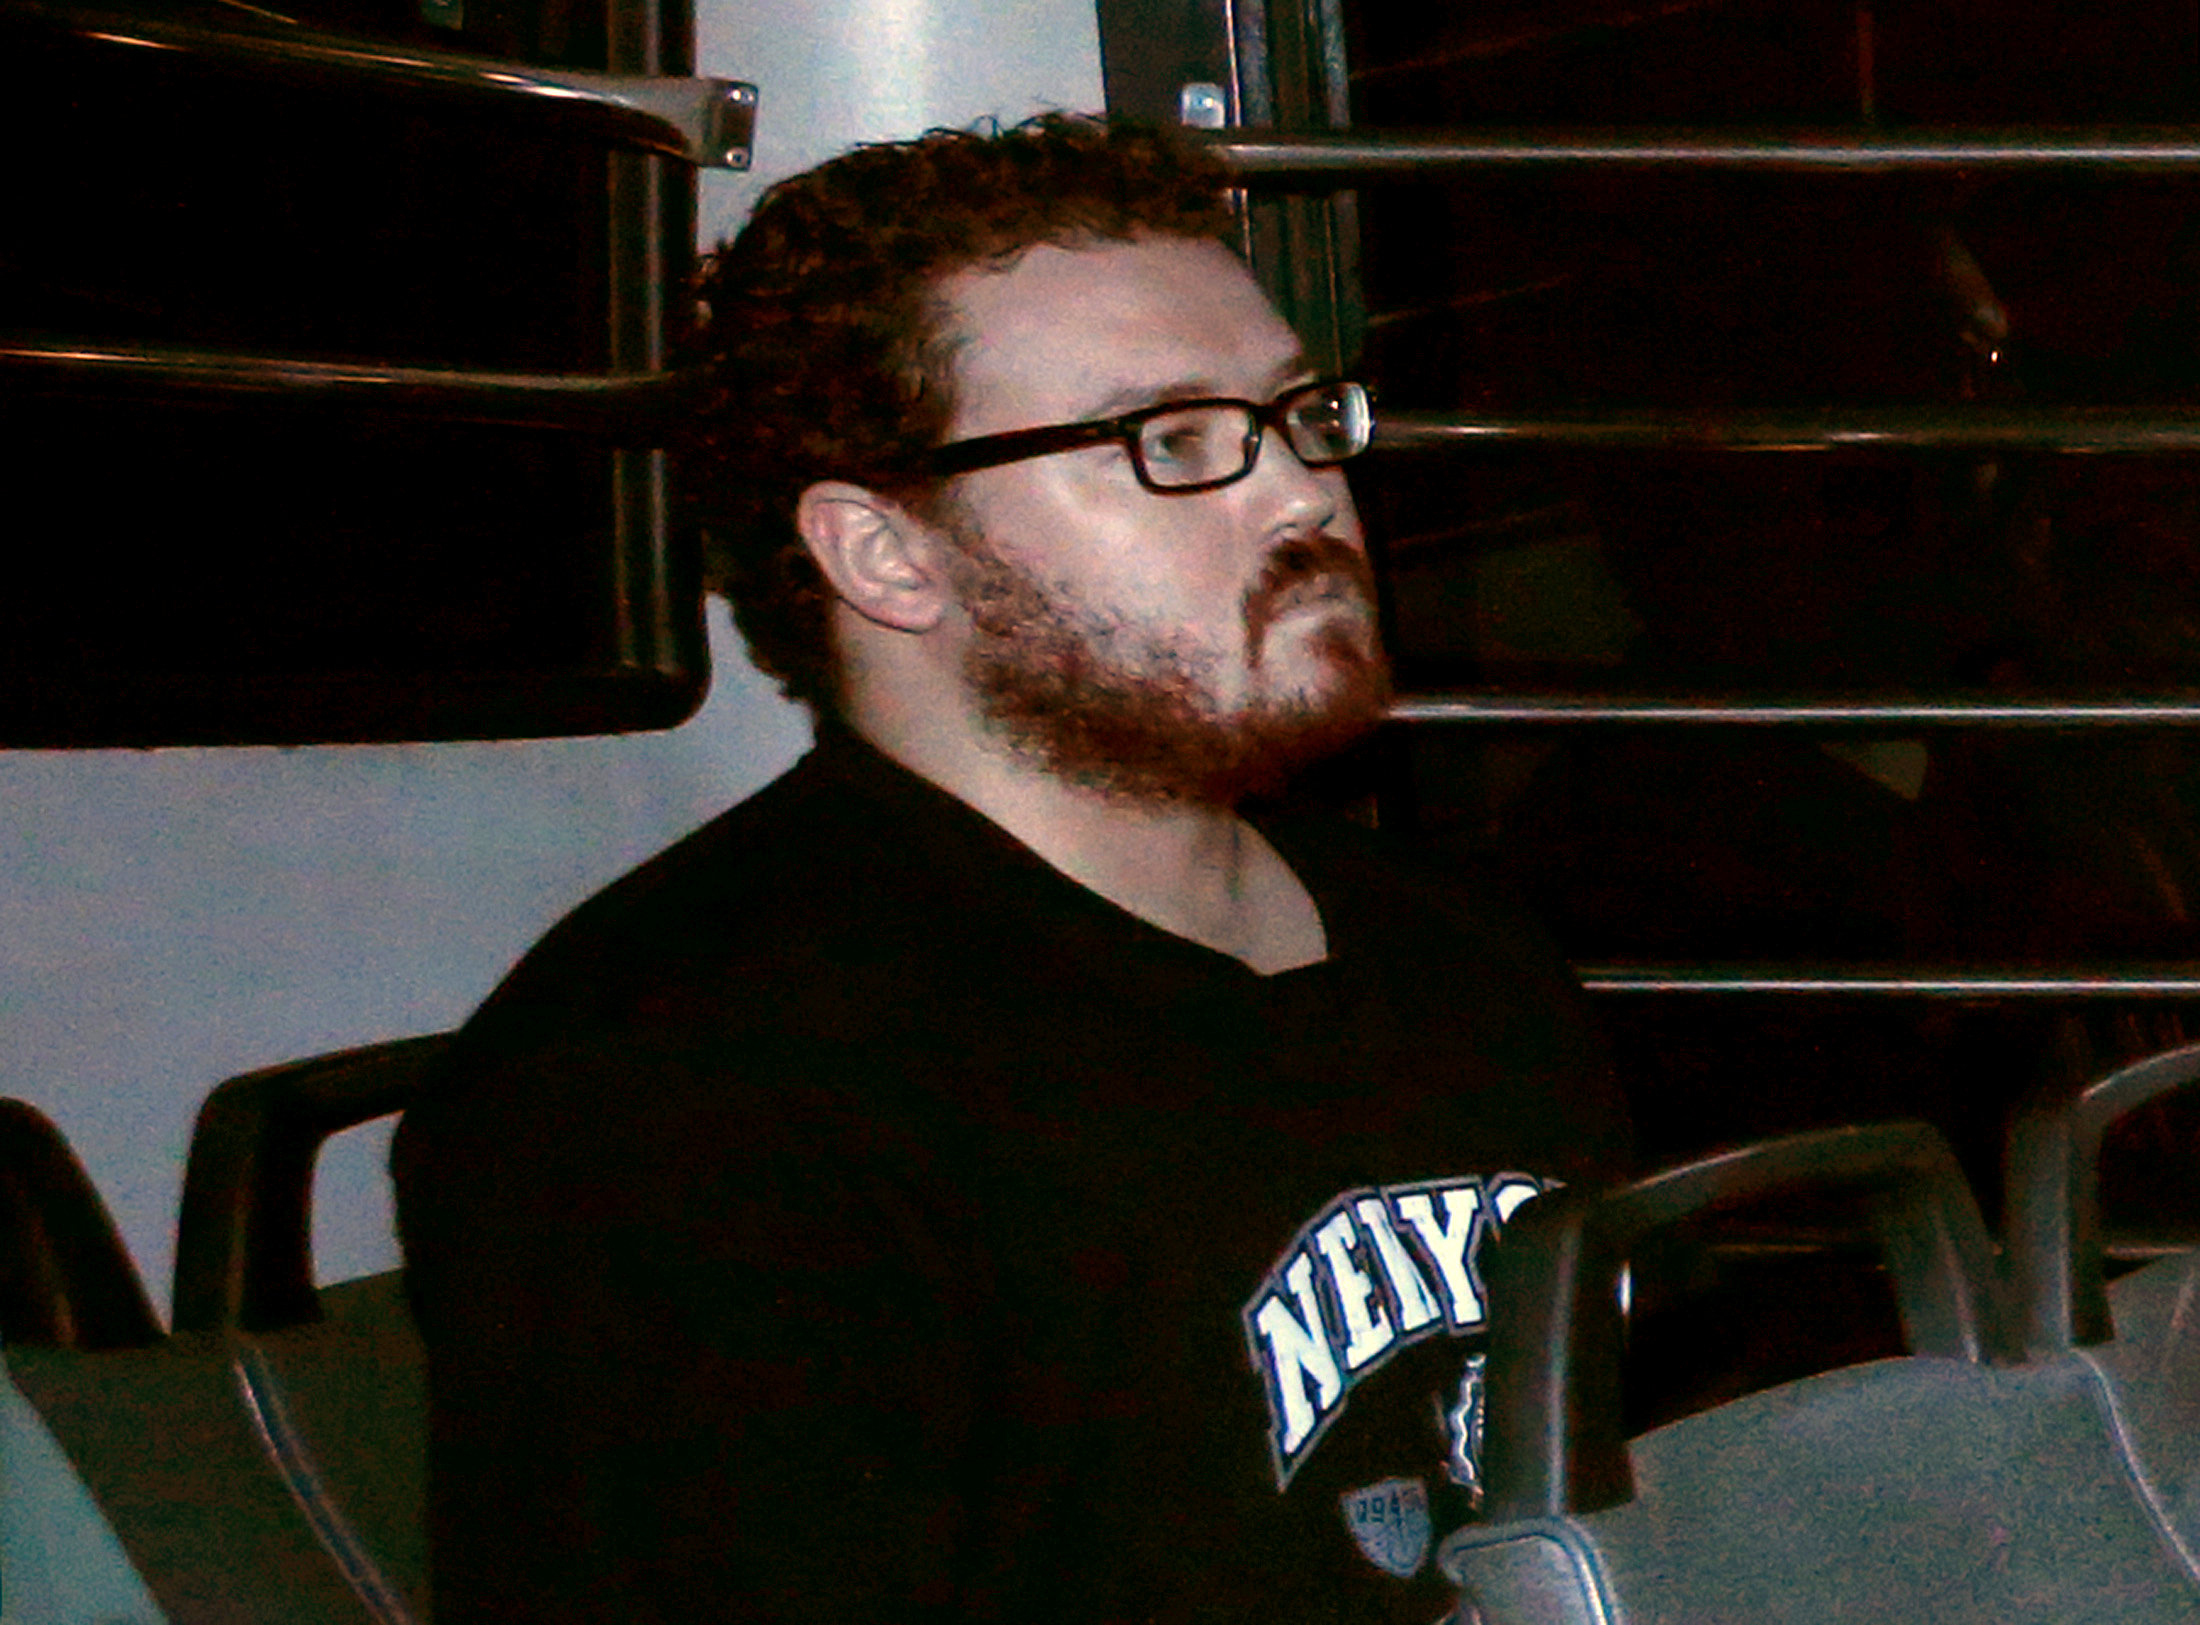 British banker to appeal conviction over Hong Kong double murders